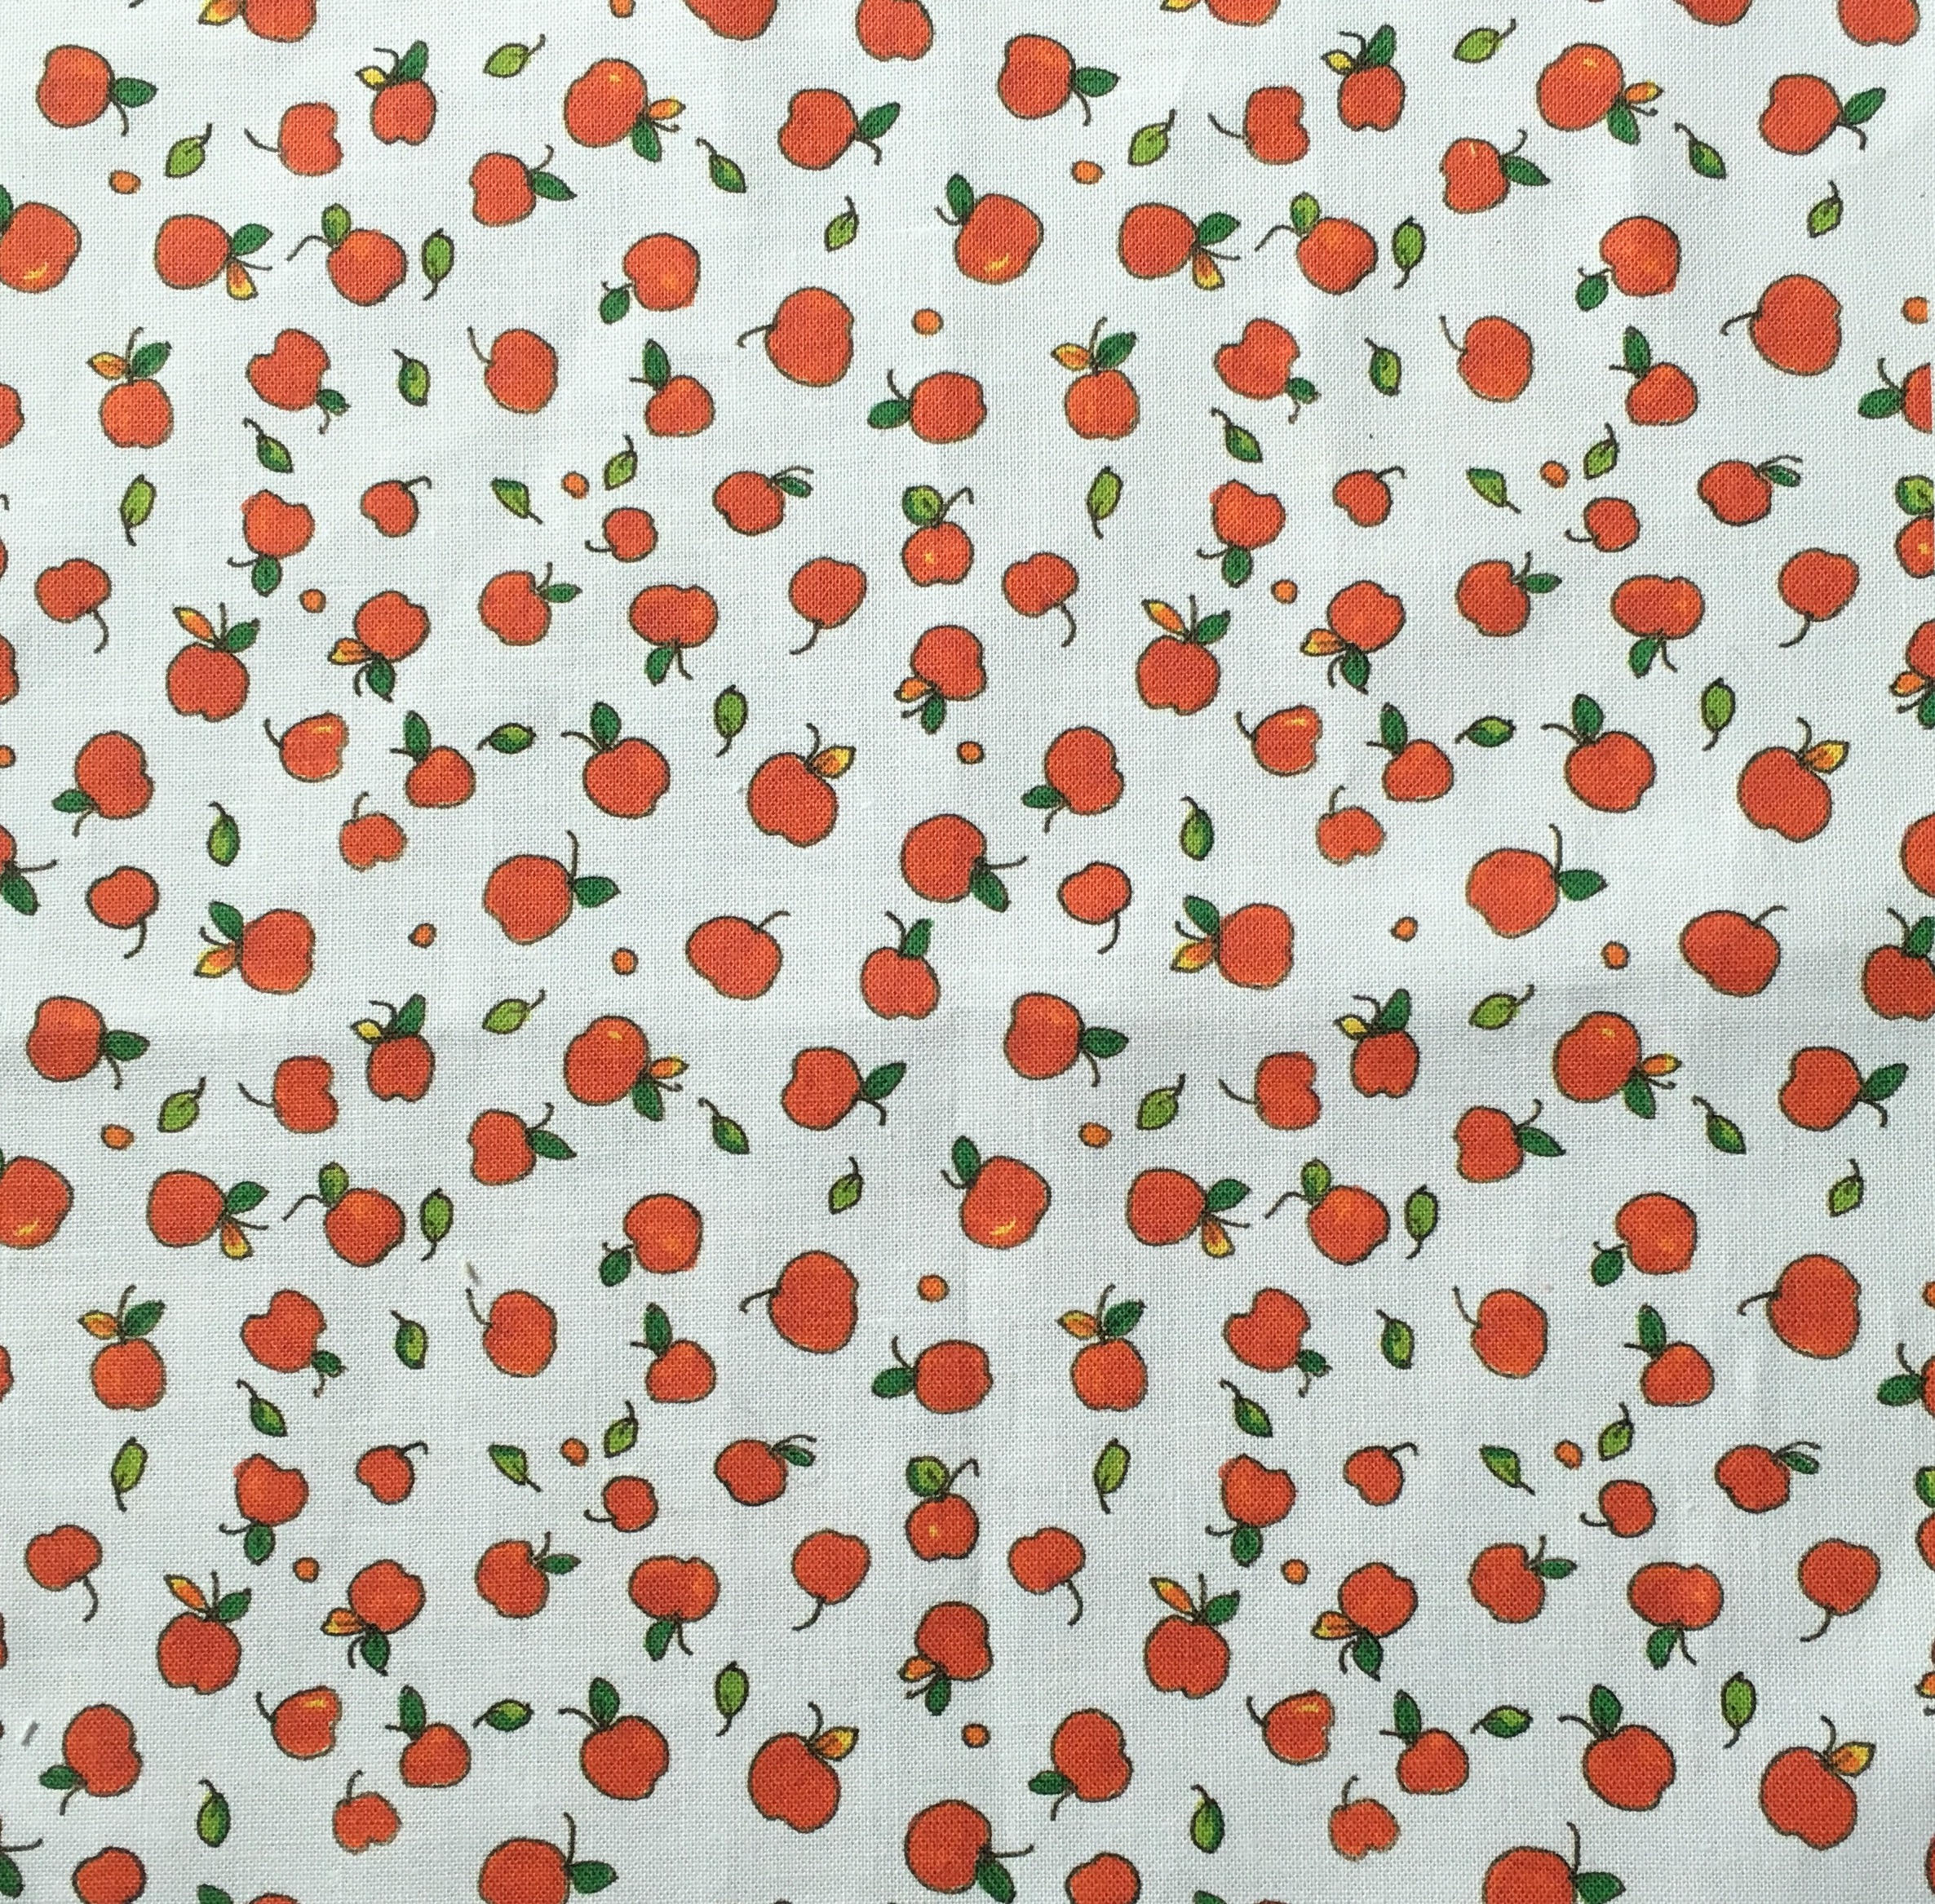 Fabric Tossed Apples and Dots printed.jpg